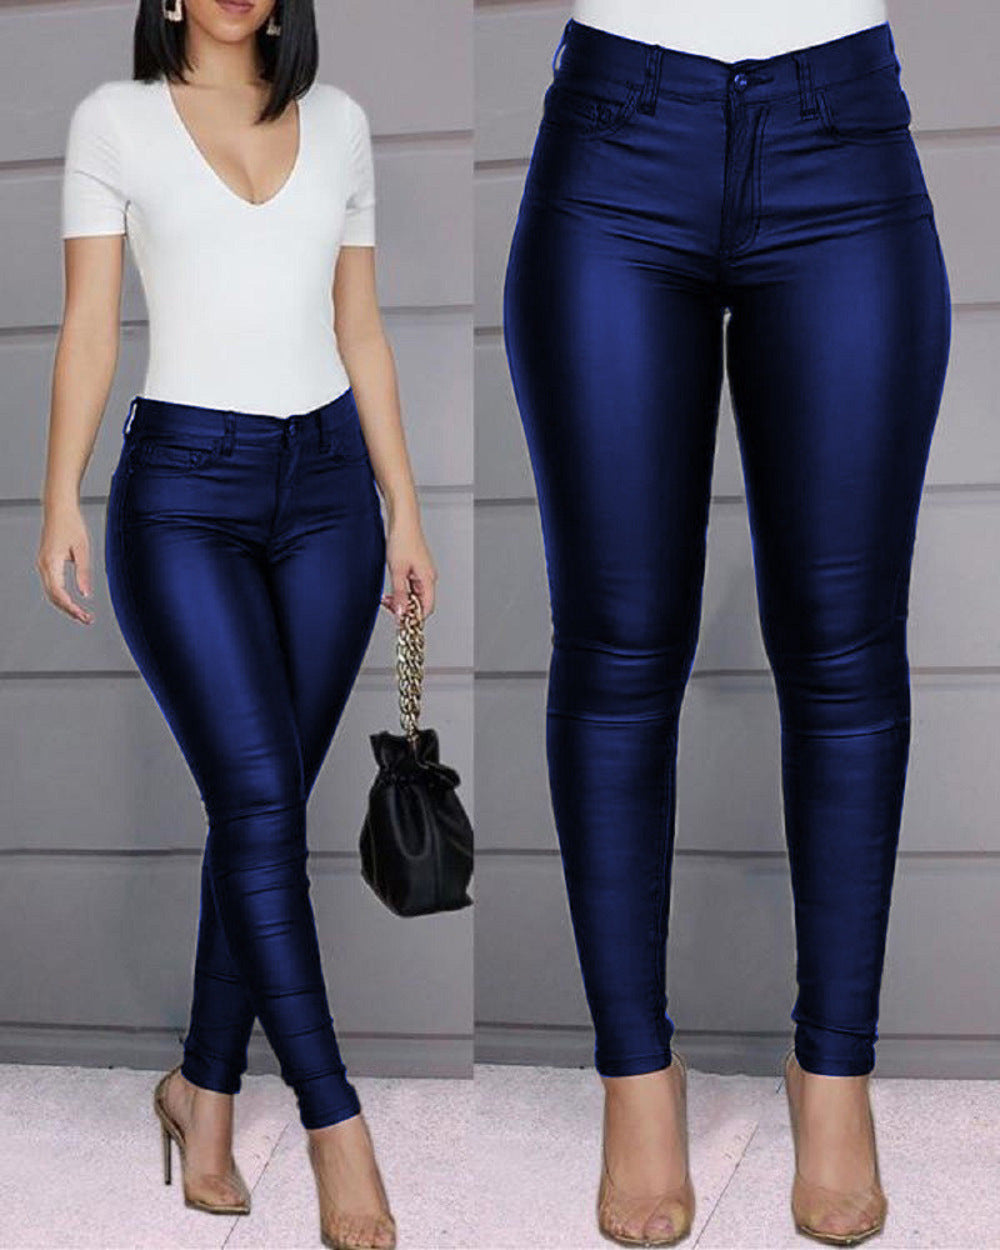 Solid Color Leather Pants Mid Waist Casual Sexy Skinny Women's Trousers